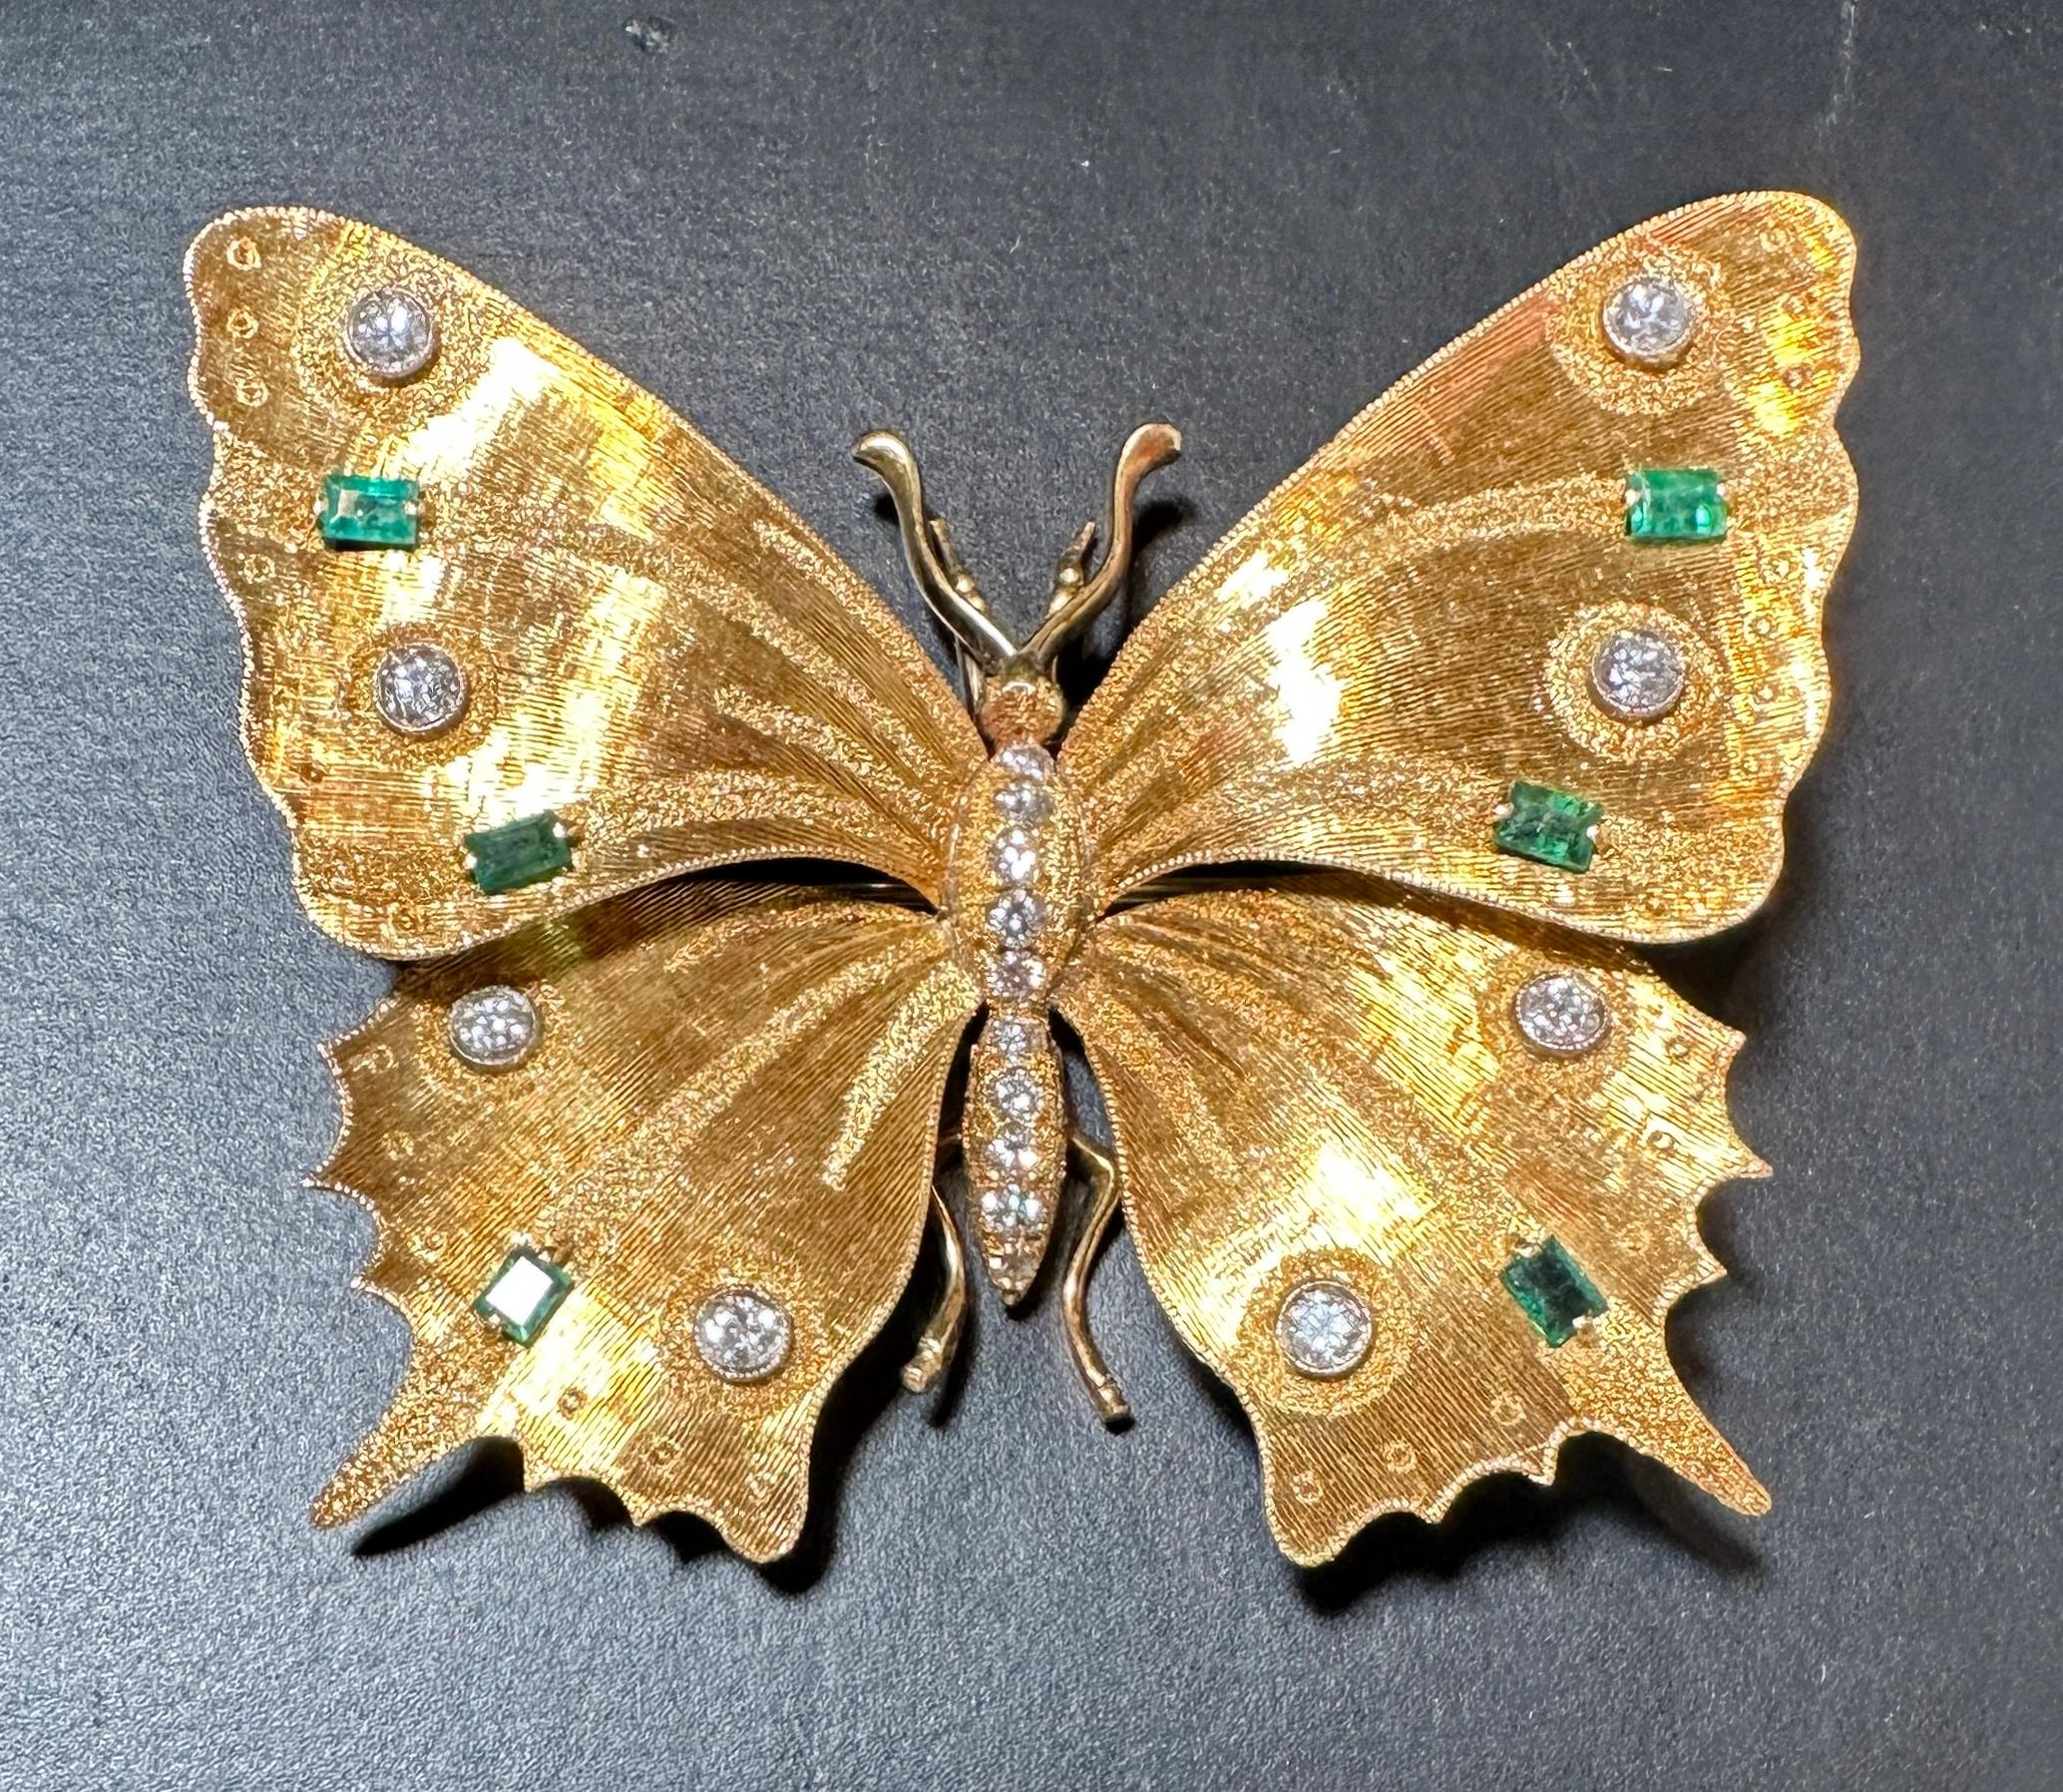 Gold, 18 karat diamond and emerald brooch pin in the form of a butterfly. 18 round diamonds  approximately .60carats G color SI1 clarity. 6 baguette emeralds. 
20.2g 
60mm x 51mm. 
Marked 750.